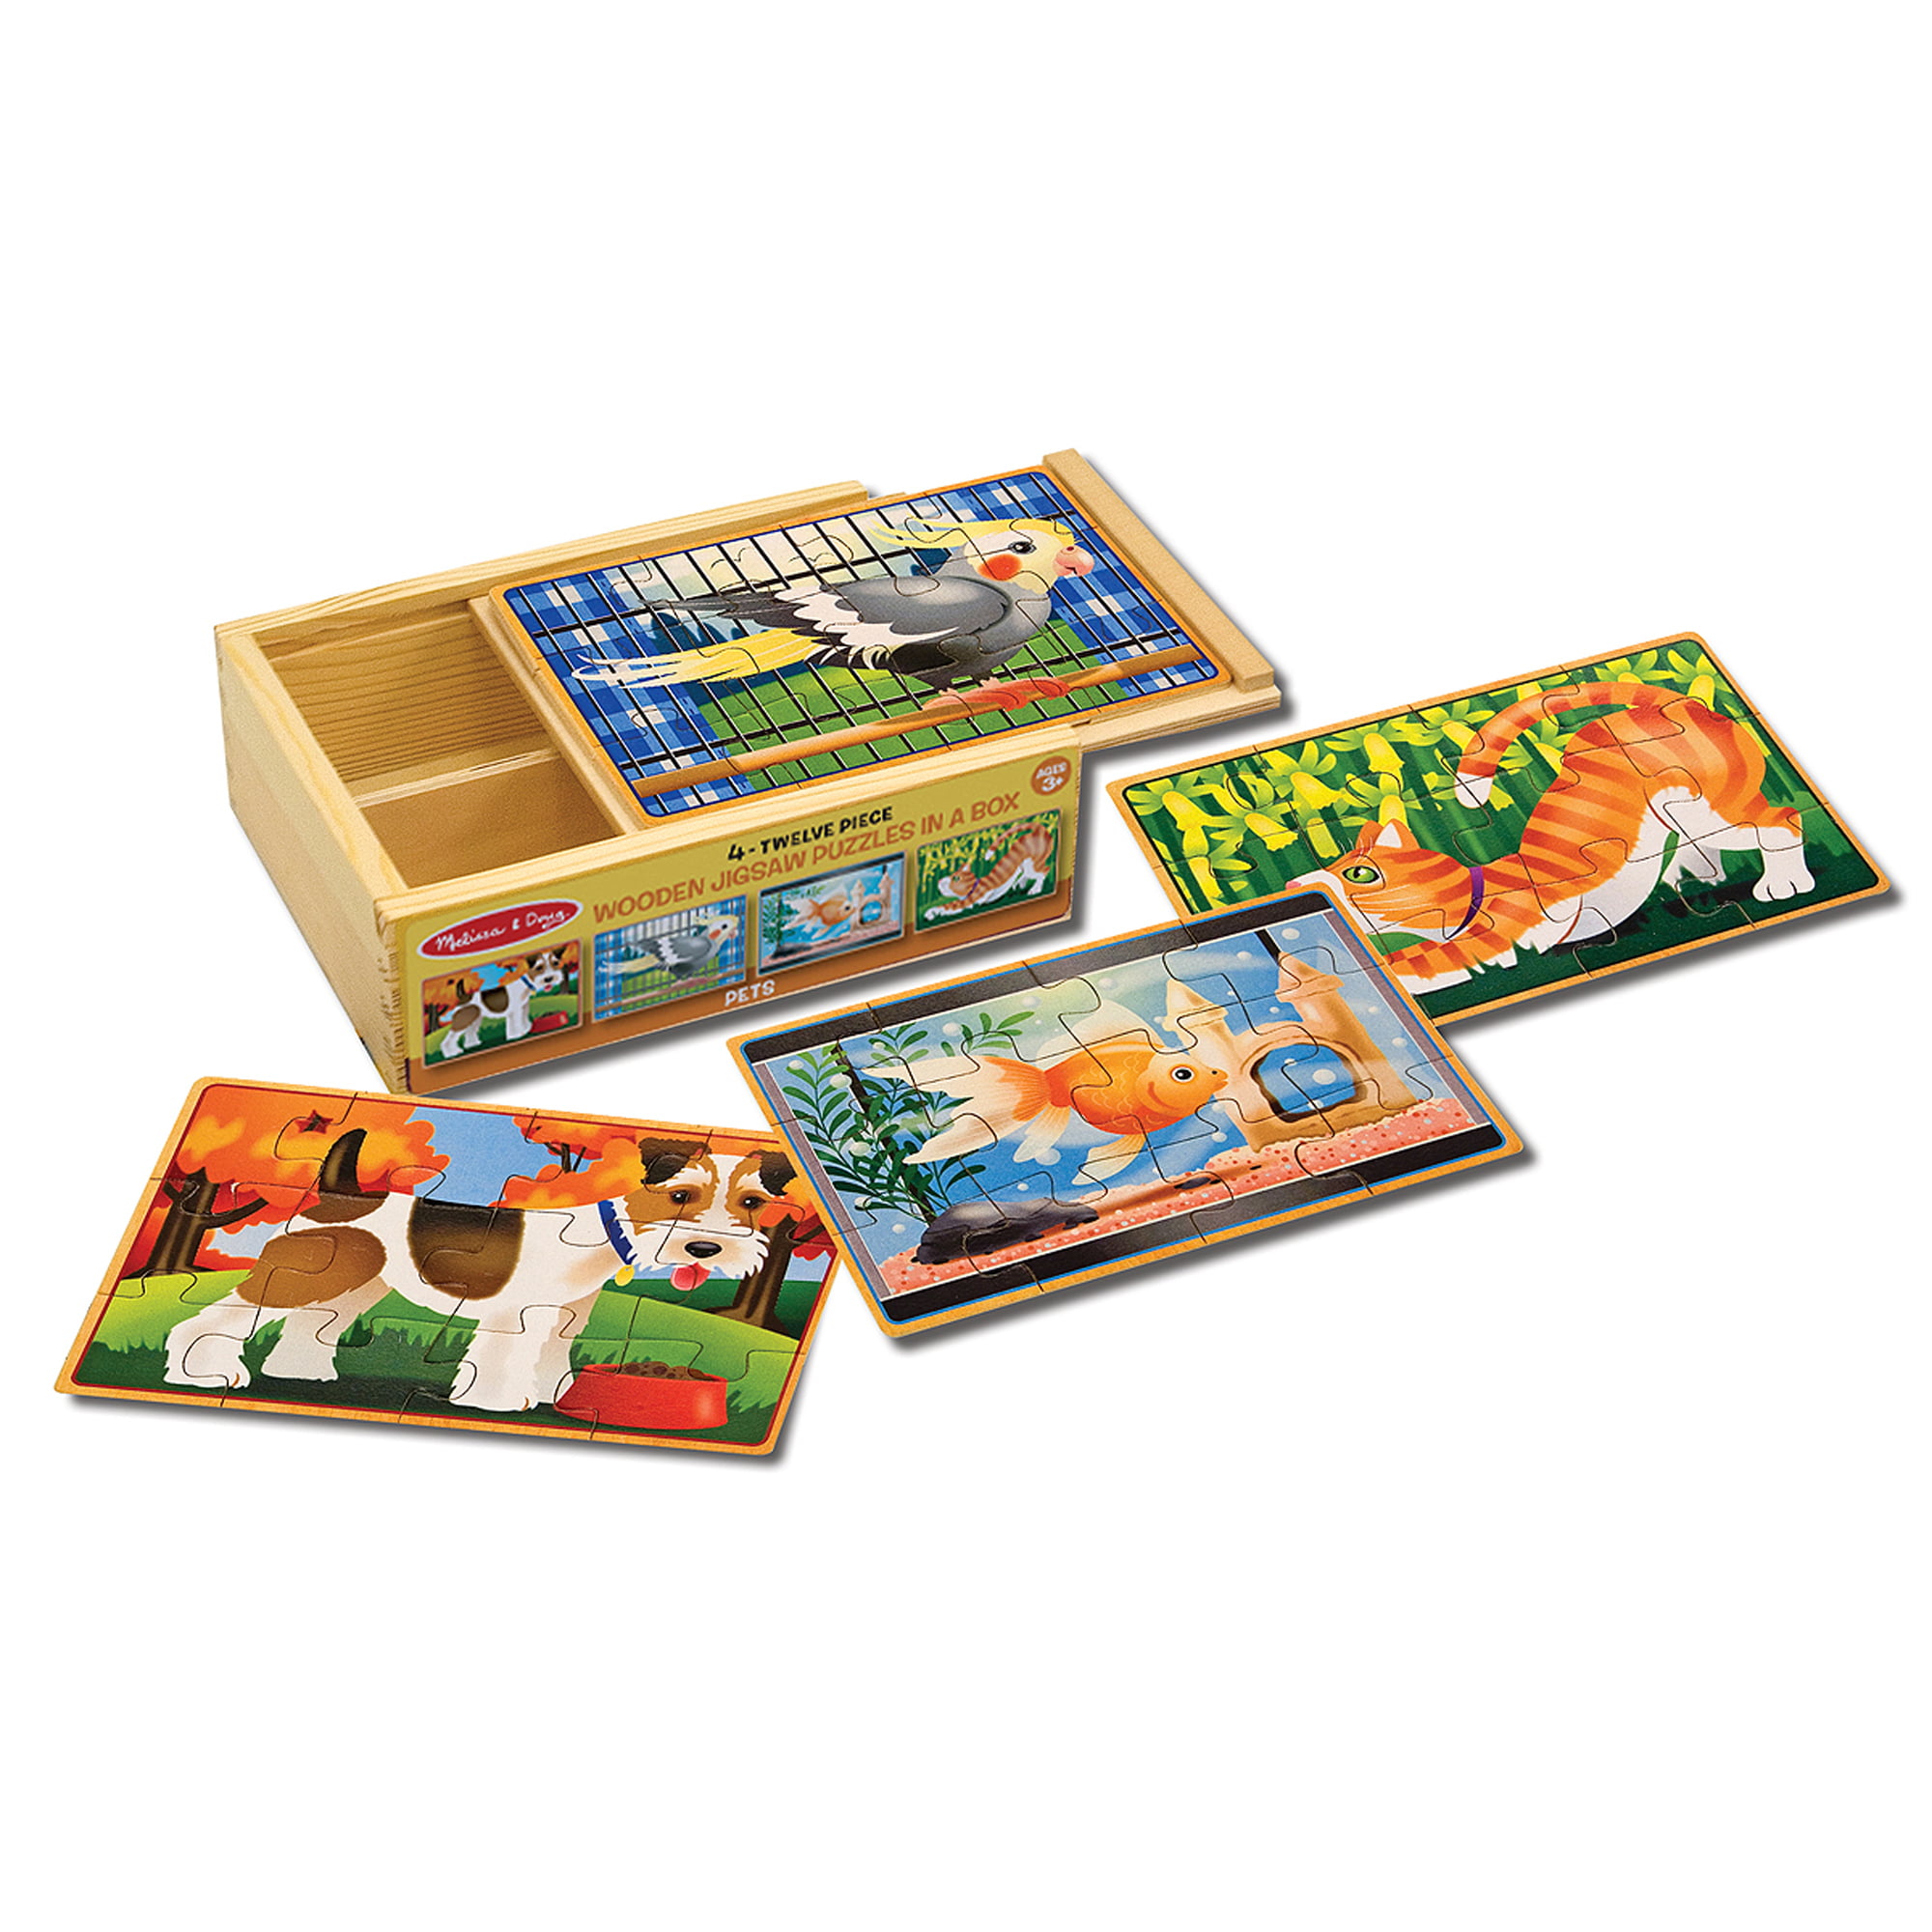 Melissa & Doug Wooden Jigsaw Puzzles in a Box for sale online 